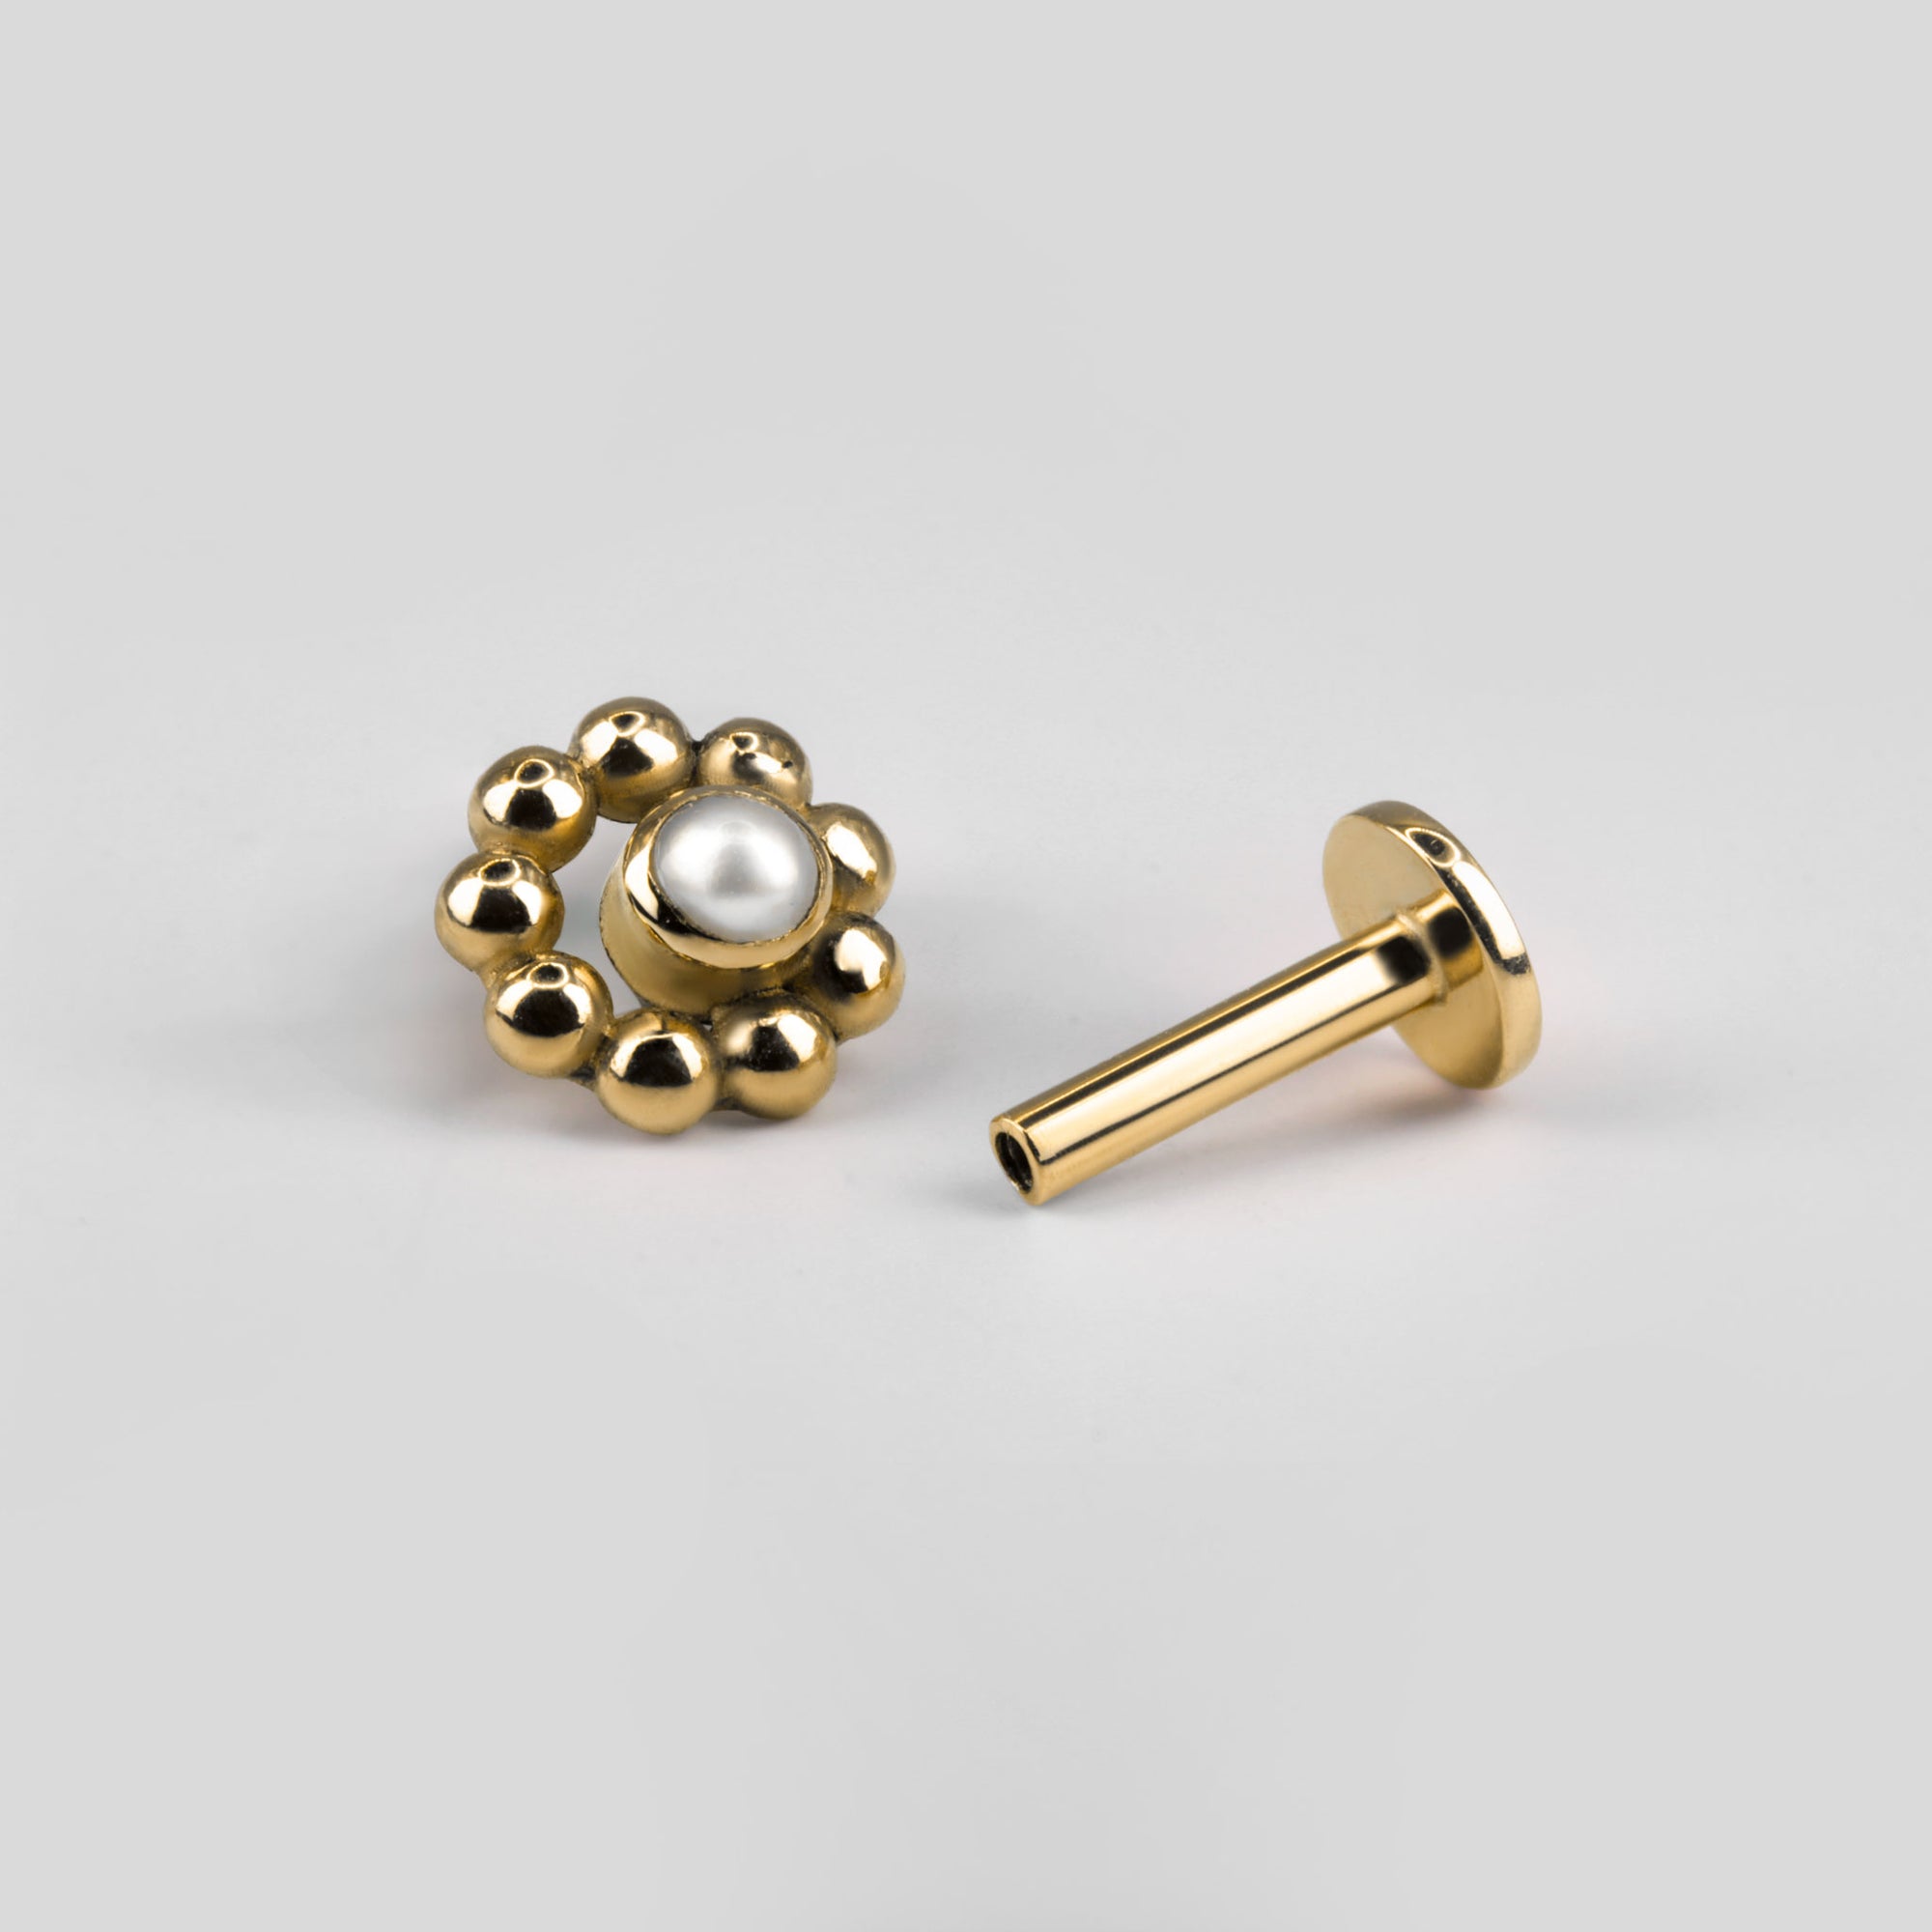 Circular beaded ear piercing in 18k yellow gold with pearl